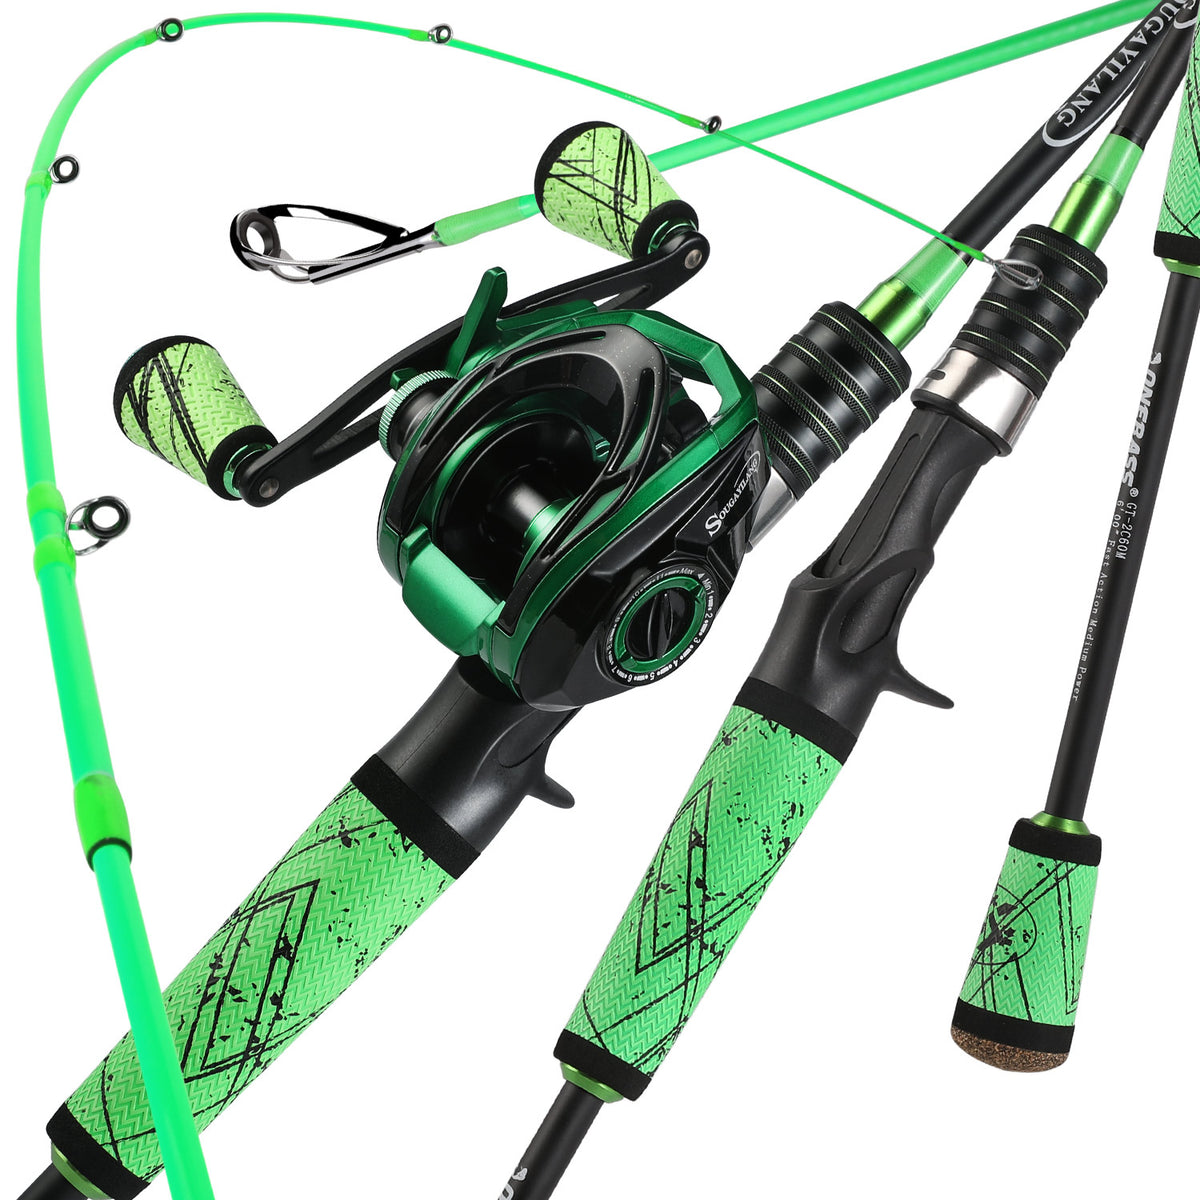 One Bass Fishing Rod and Reel Combo, Medium Fast Baitcasting Combo, 24-Ton Carbon Fiber 2 Pieces Fishing Poles with Baitcaster Reel Super Polymer